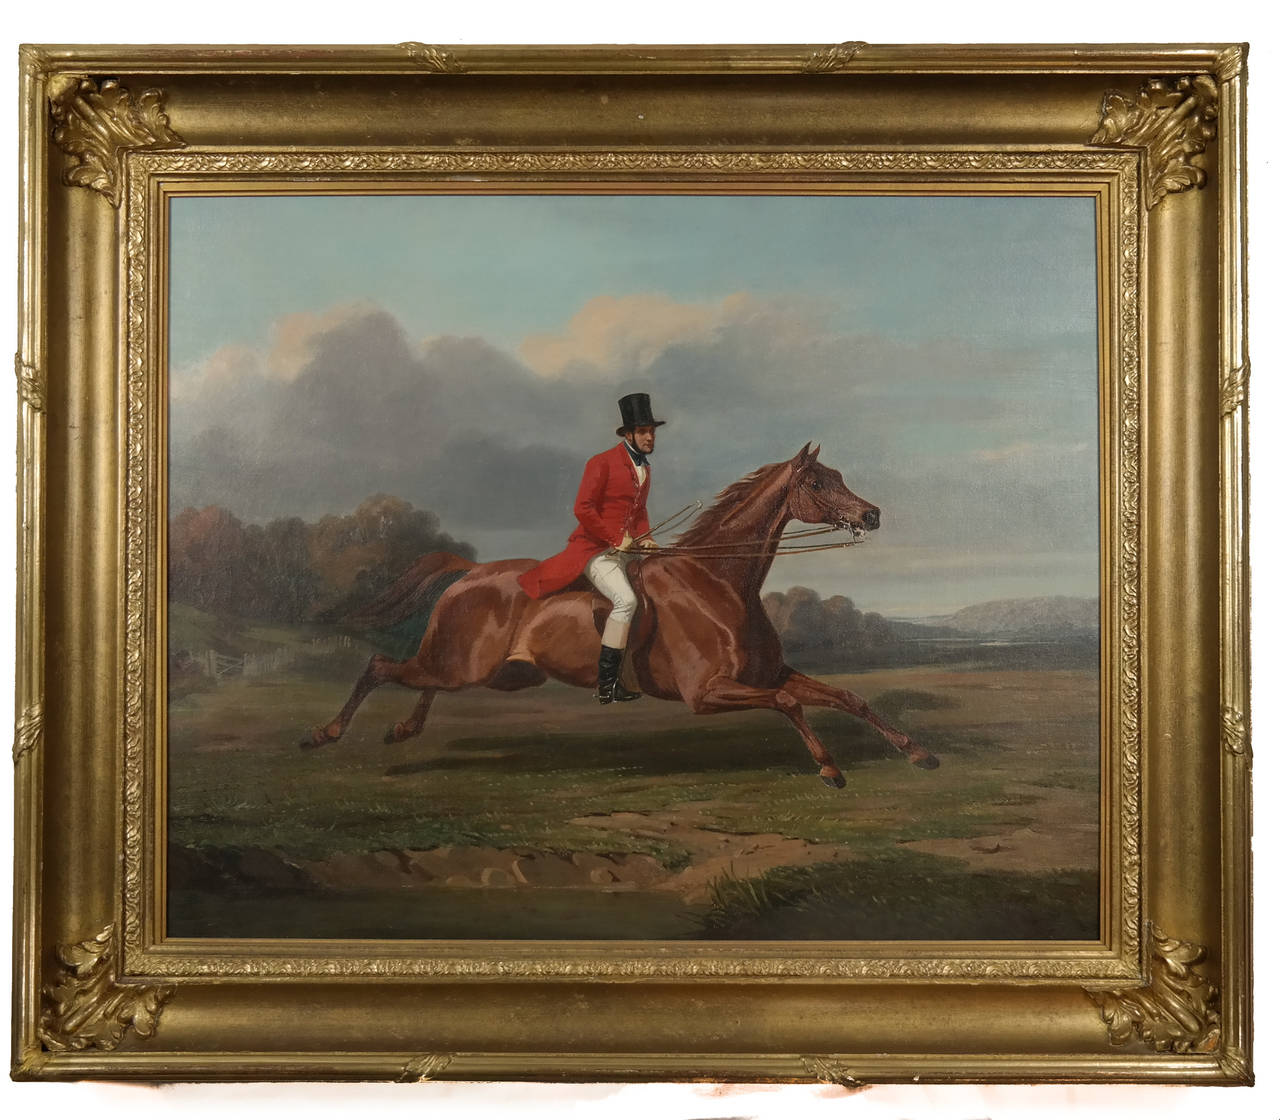 Late 18th, early 19th century oil on canvas, depicting a landscape with a man riding a horse, in carved gilded frame. Unsigned.

Canvas size: 30.5